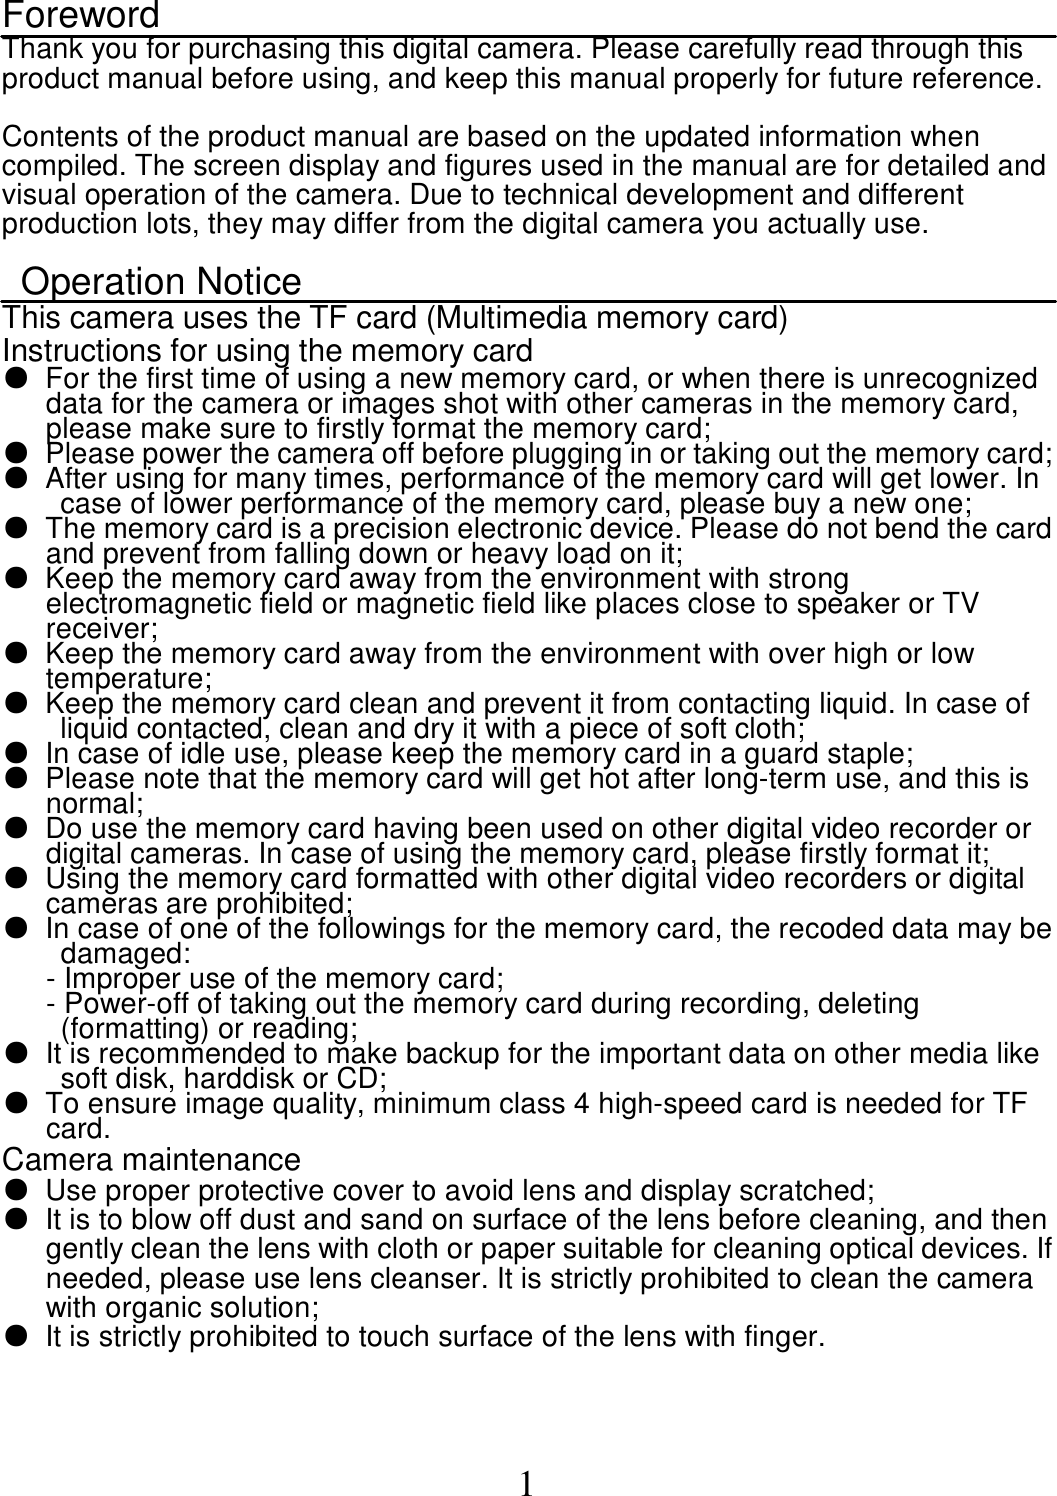  1 Foreword Thank you for purchasing this digital camera. Please carefully read through this product manual before using, and keep this manual properly for future reference.      Contents of the product manual are based on the updated information when compiled. The screen display and figures used in the manual are for detailed and visual operation of the camera. Due to technical development and different production lots, they may differ from the digital camera you actually use.      Operation Notice This camera uses the TF card (Multimedia memory card) Instructions for using the memory card ●  For the first time of using a new memory card, or when there is unrecognized data for the camera or images shot with other cameras in the memory card, please make sure to firstly format the memory card;   ●  Please power the camera off before plugging in or taking out the memory card; ●  After using for many times, performance of the memory card will get lower. In case of lower performance of the memory card, please buy a new one;   ●  The memory card is a precision electronic device. Please do not bend the card and prevent from falling down or heavy load on it;     ●  Keep the memory card away from the environment with strong electromagnetic field or magnetic field like places close to speaker or TV receiver;   ●  Keep the memory card away from the environment with over high or low temperature; ●  Keep the memory card clean and prevent it from contacting liquid. In case of liquid contacted, clean and dry it with a piece of soft cloth; ●  In case of idle use, please keep the memory card in a guard staple;   ●  Please note that the memory card will get hot after long-term use, and this is normal;   ●  Do use the memory card having been used on other digital video recorder or digital cameras. In case of using the memory card, please firstly format it;   ●  Using the memory card formatted with other digital video recorders or digital cameras are prohibited;   ●  In case of one of the followings for the memory card, the recoded data may be damaged: - Improper use of the memory card; - Power-off of taking out the memory card during recording, deleting (formatting) or reading;   ●  It is recommended to make backup for the important data on other media like soft disk, harddisk or CD;     ● To ensure image quality, minimum class 4 high-speed card is needed for TF card. Camera maintenance   ●  Use proper protective cover to avoid lens and display scratched; ●  It is to blow off dust and sand on surface of the lens before cleaning, and then gently clean the lens with cloth or paper suitable for cleaning optical devices. If needed, please use lens cleanser. It is strictly prohibited to clean the camera with organic solution;   ●  It is strictly prohibited to touch surface of the lens with finger.  